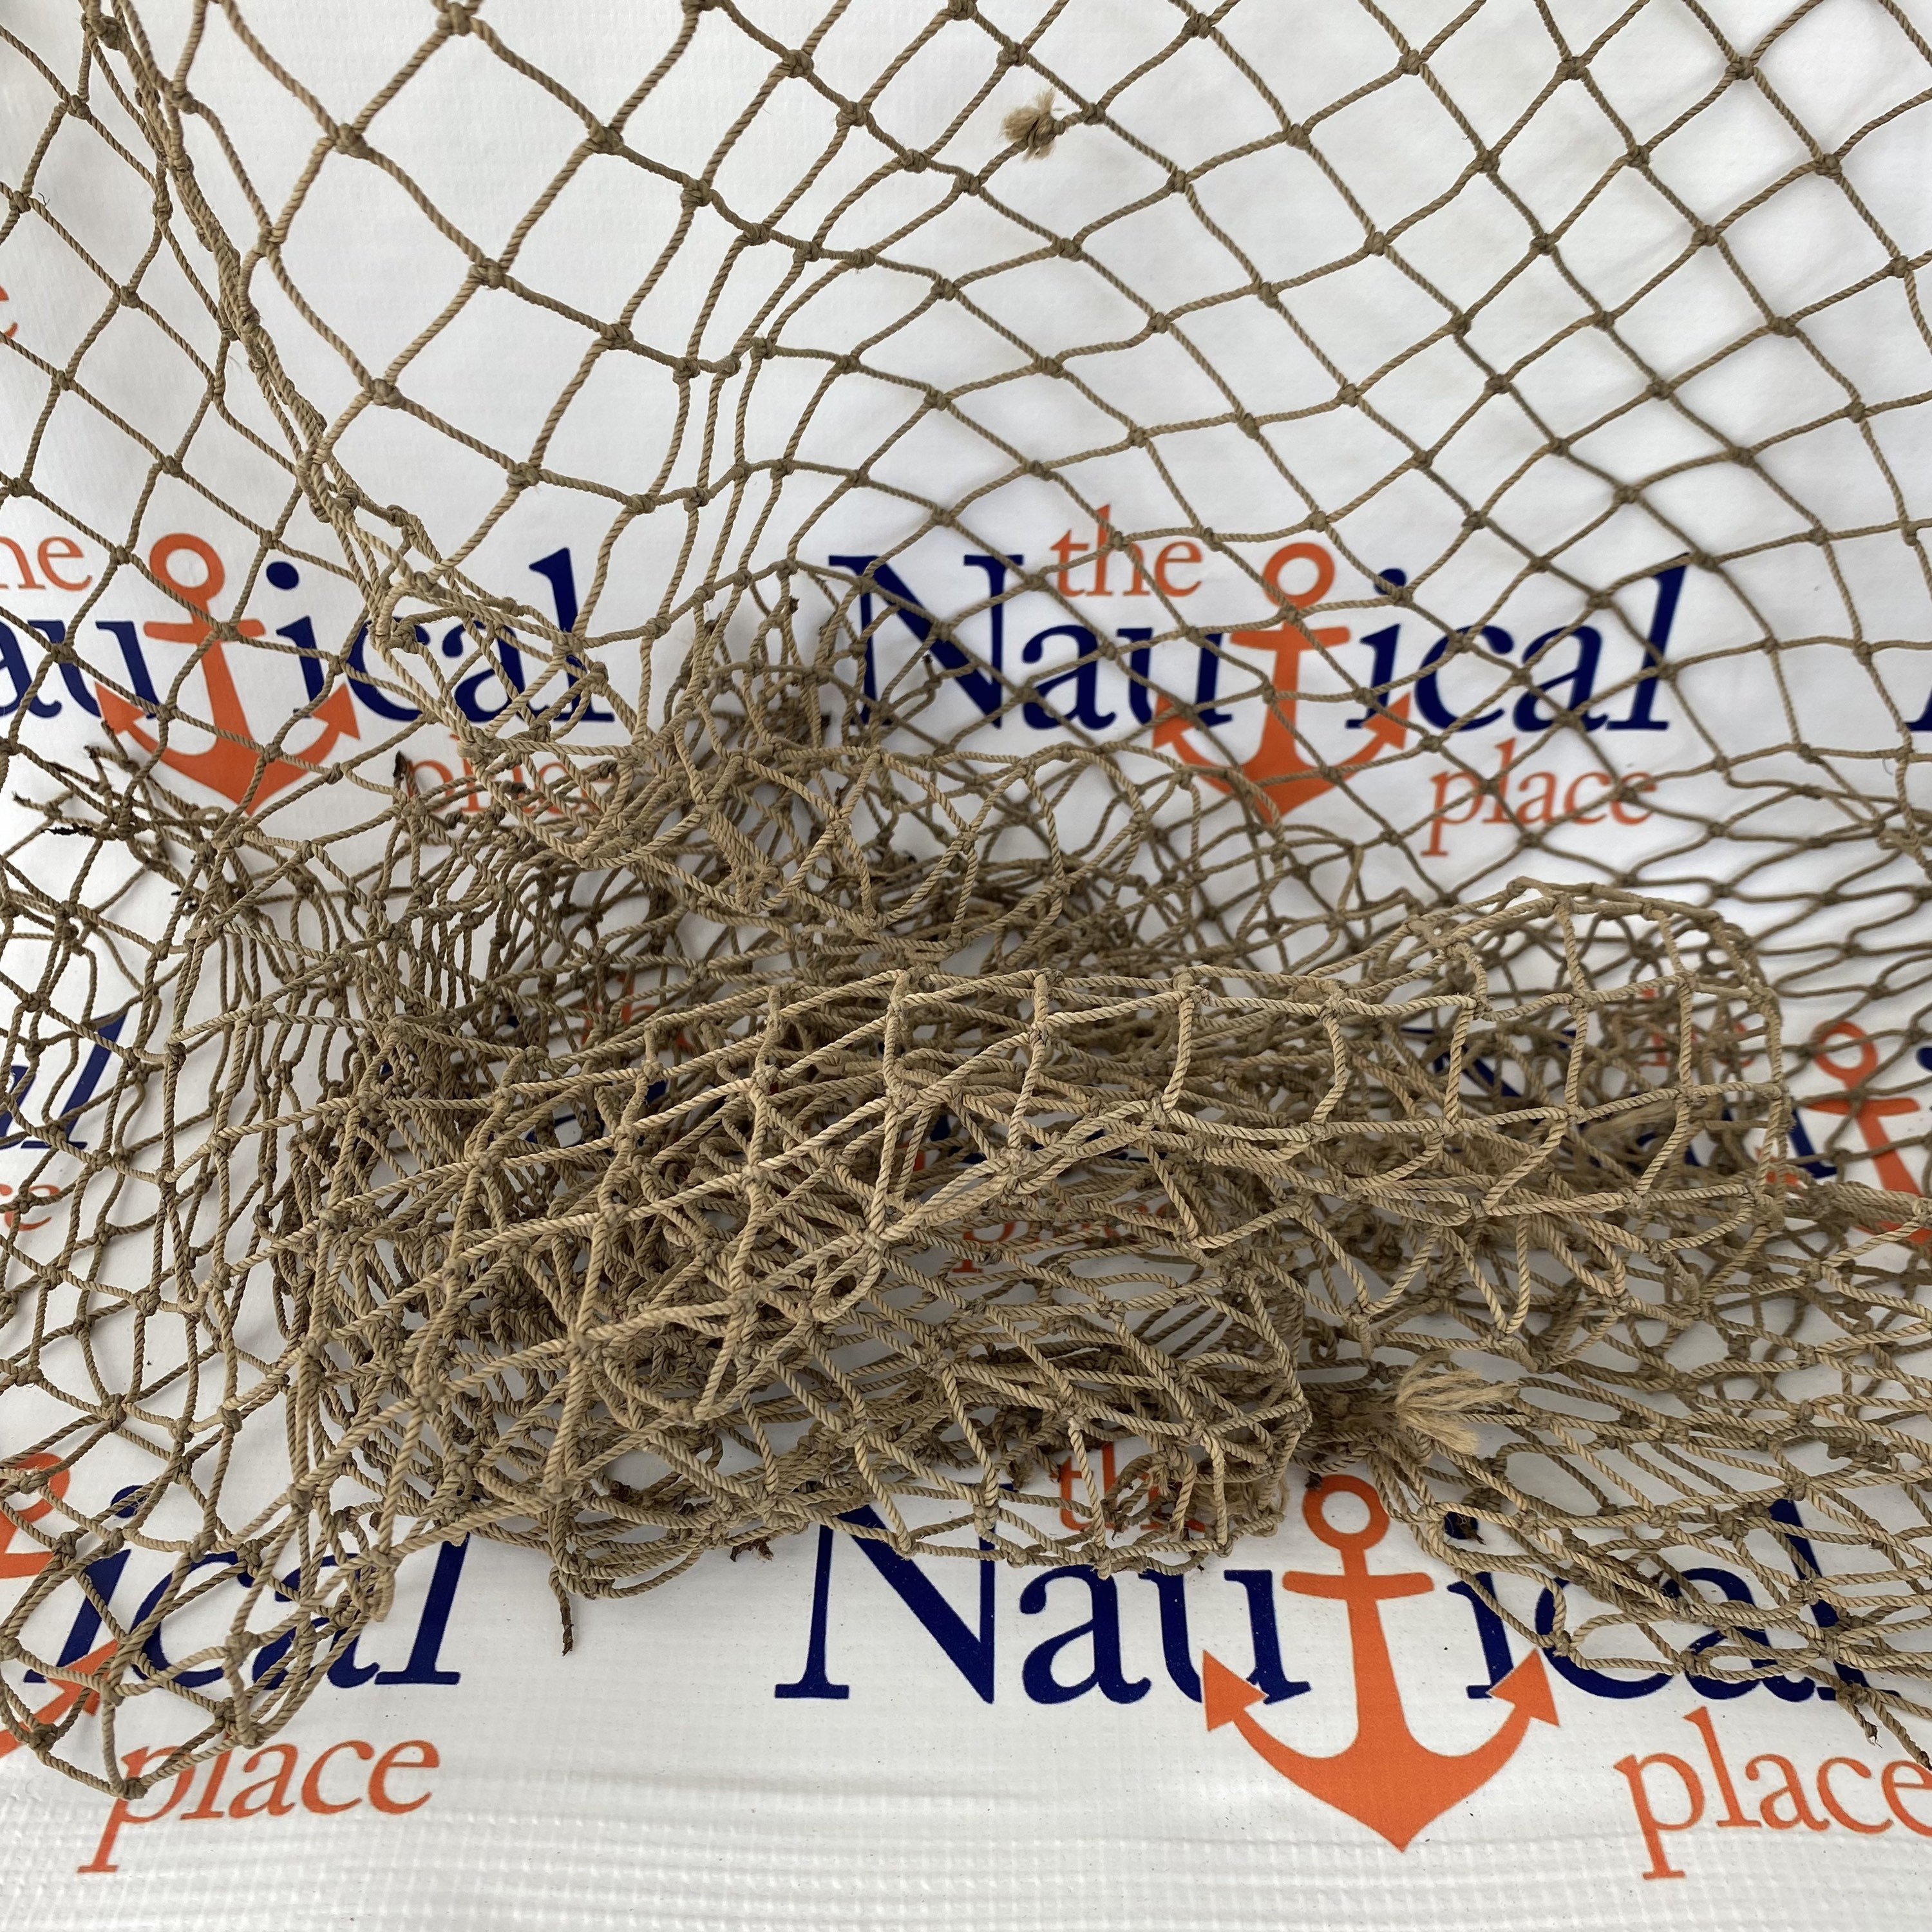 Old Used Fishing Net 2 Ft X 2 Ft Knotted Vintage Fish Netting